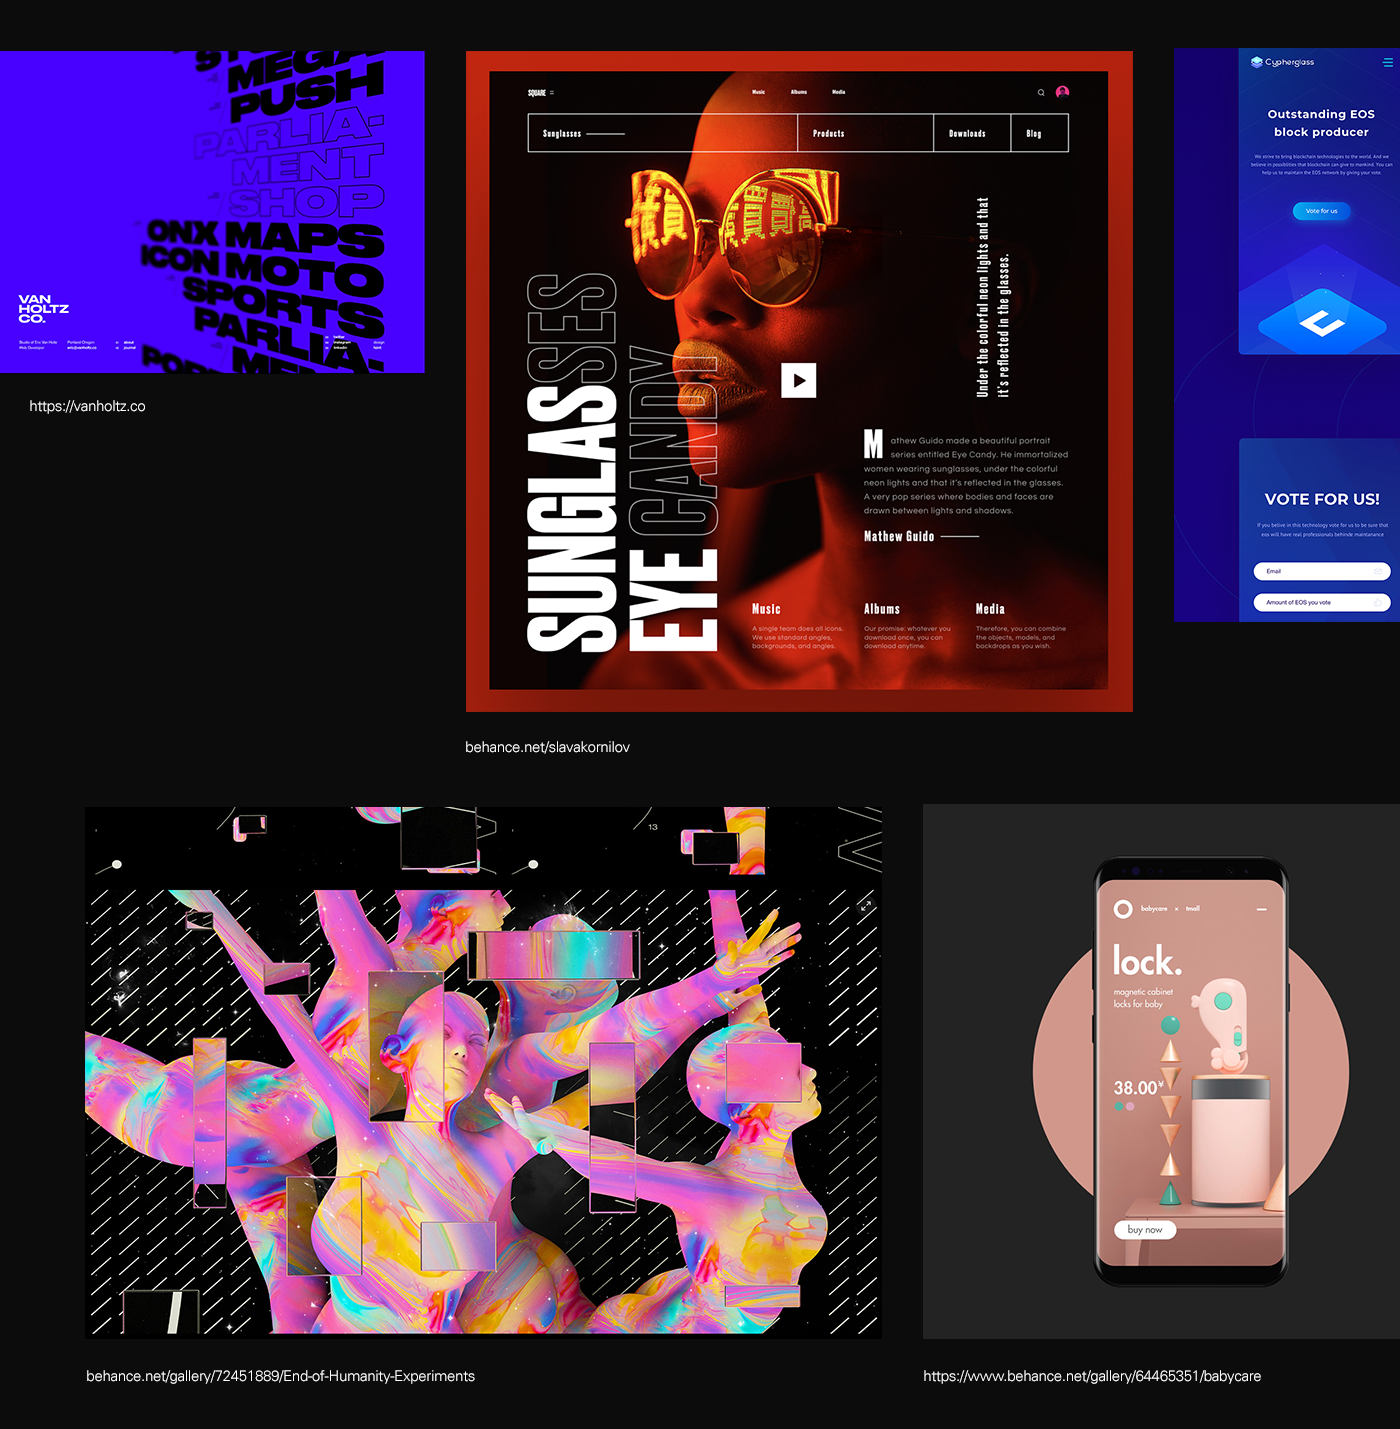 design trends Web research trend interaction SkillBox color font top 2019 Trends